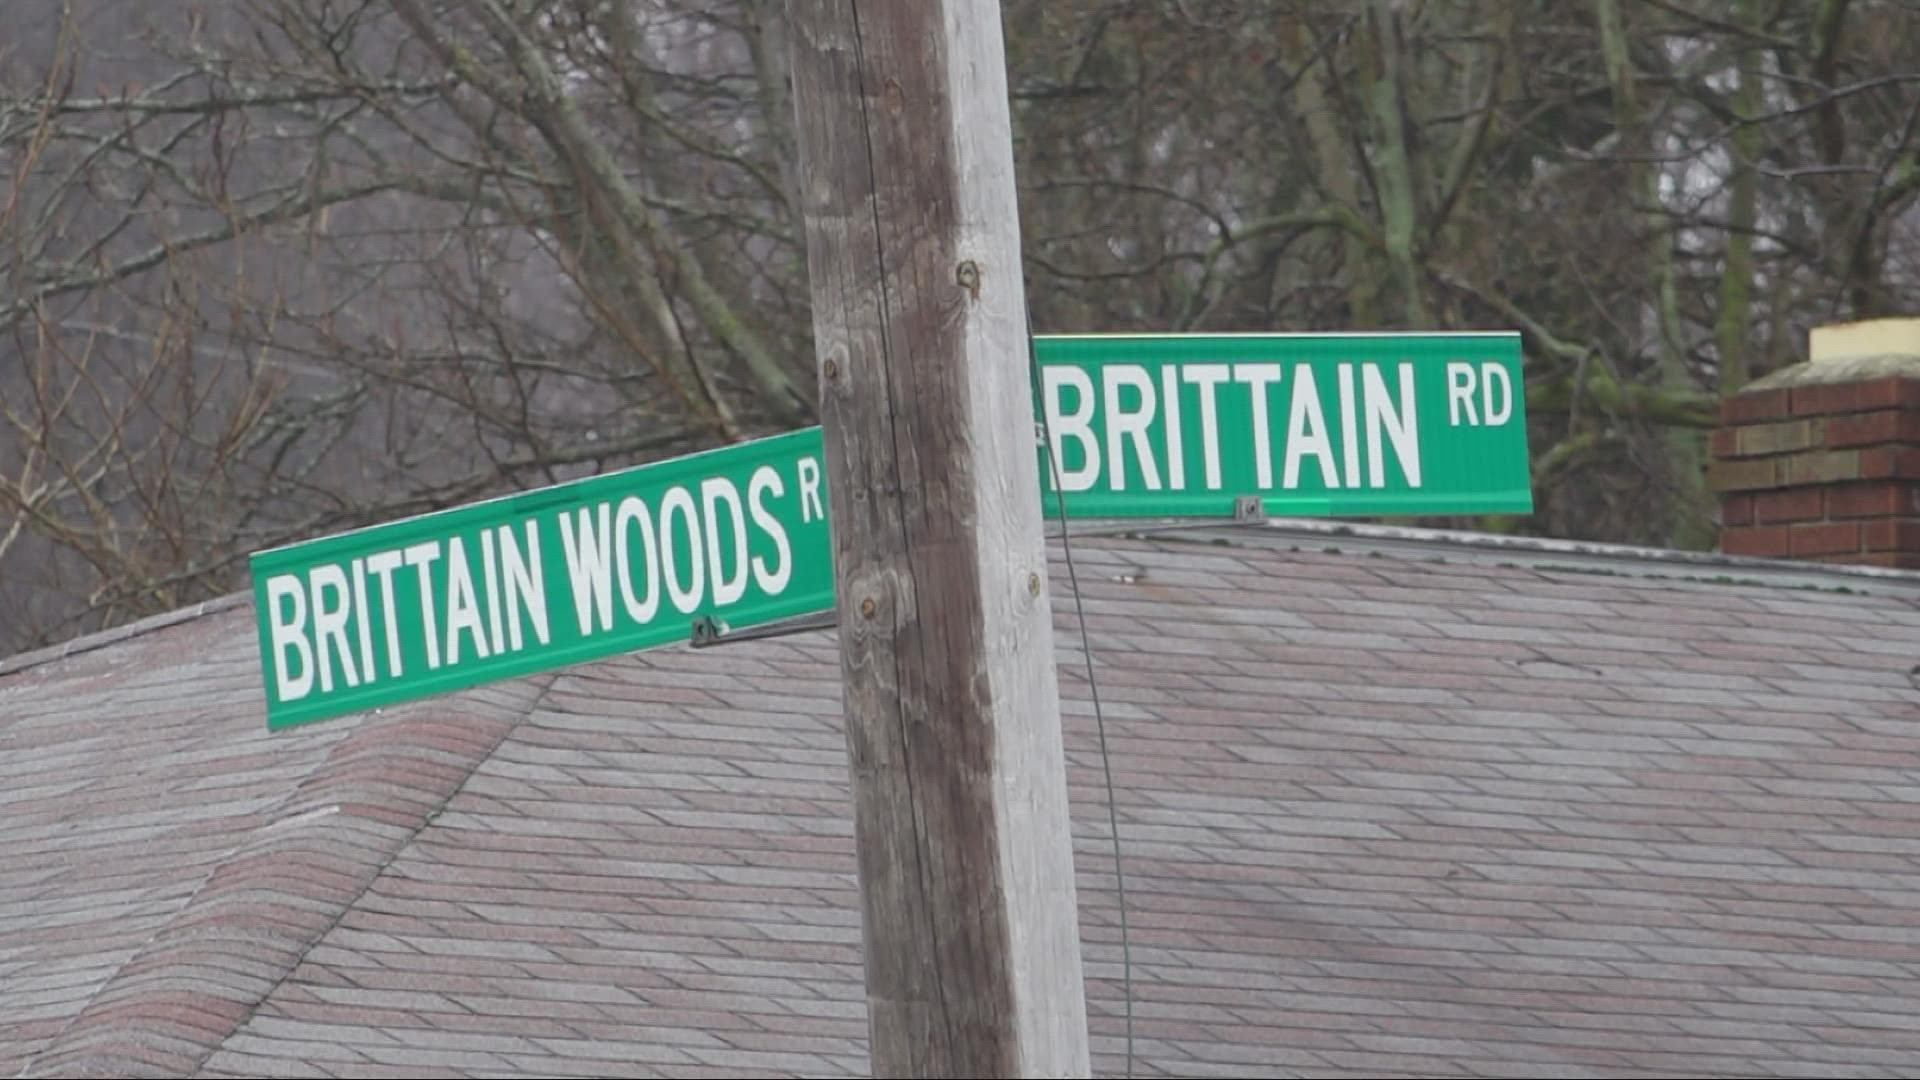 A 38-year-old woman and a 35-year-old man were killed in separate Akron shootings.